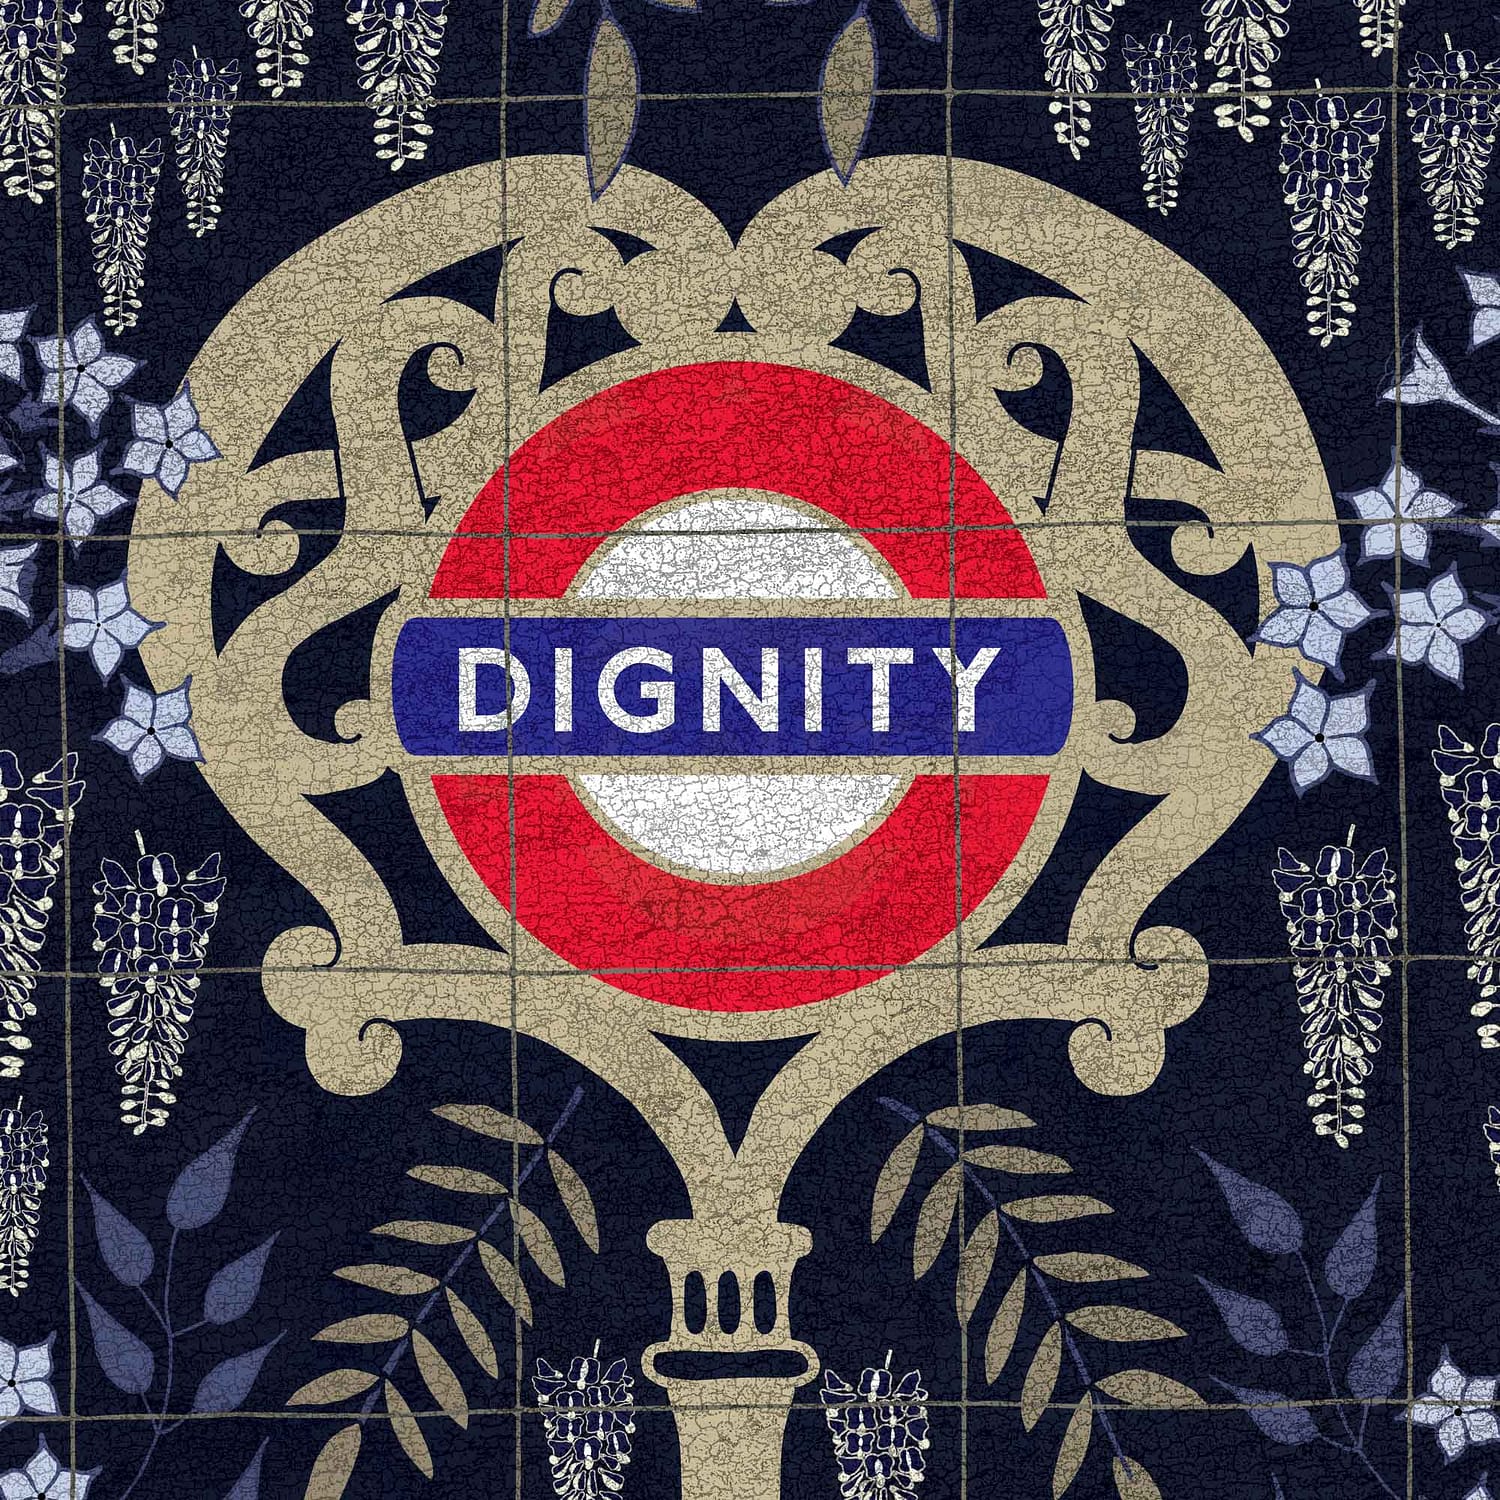 kati-lacey-illustration-editorial-conceptual-poster-red cross garden-Octavia Hill-dignity-dignified housing-social reformer-Victorian-everyday-heroes-flowers-garden- open-air living room-tiles-illustration